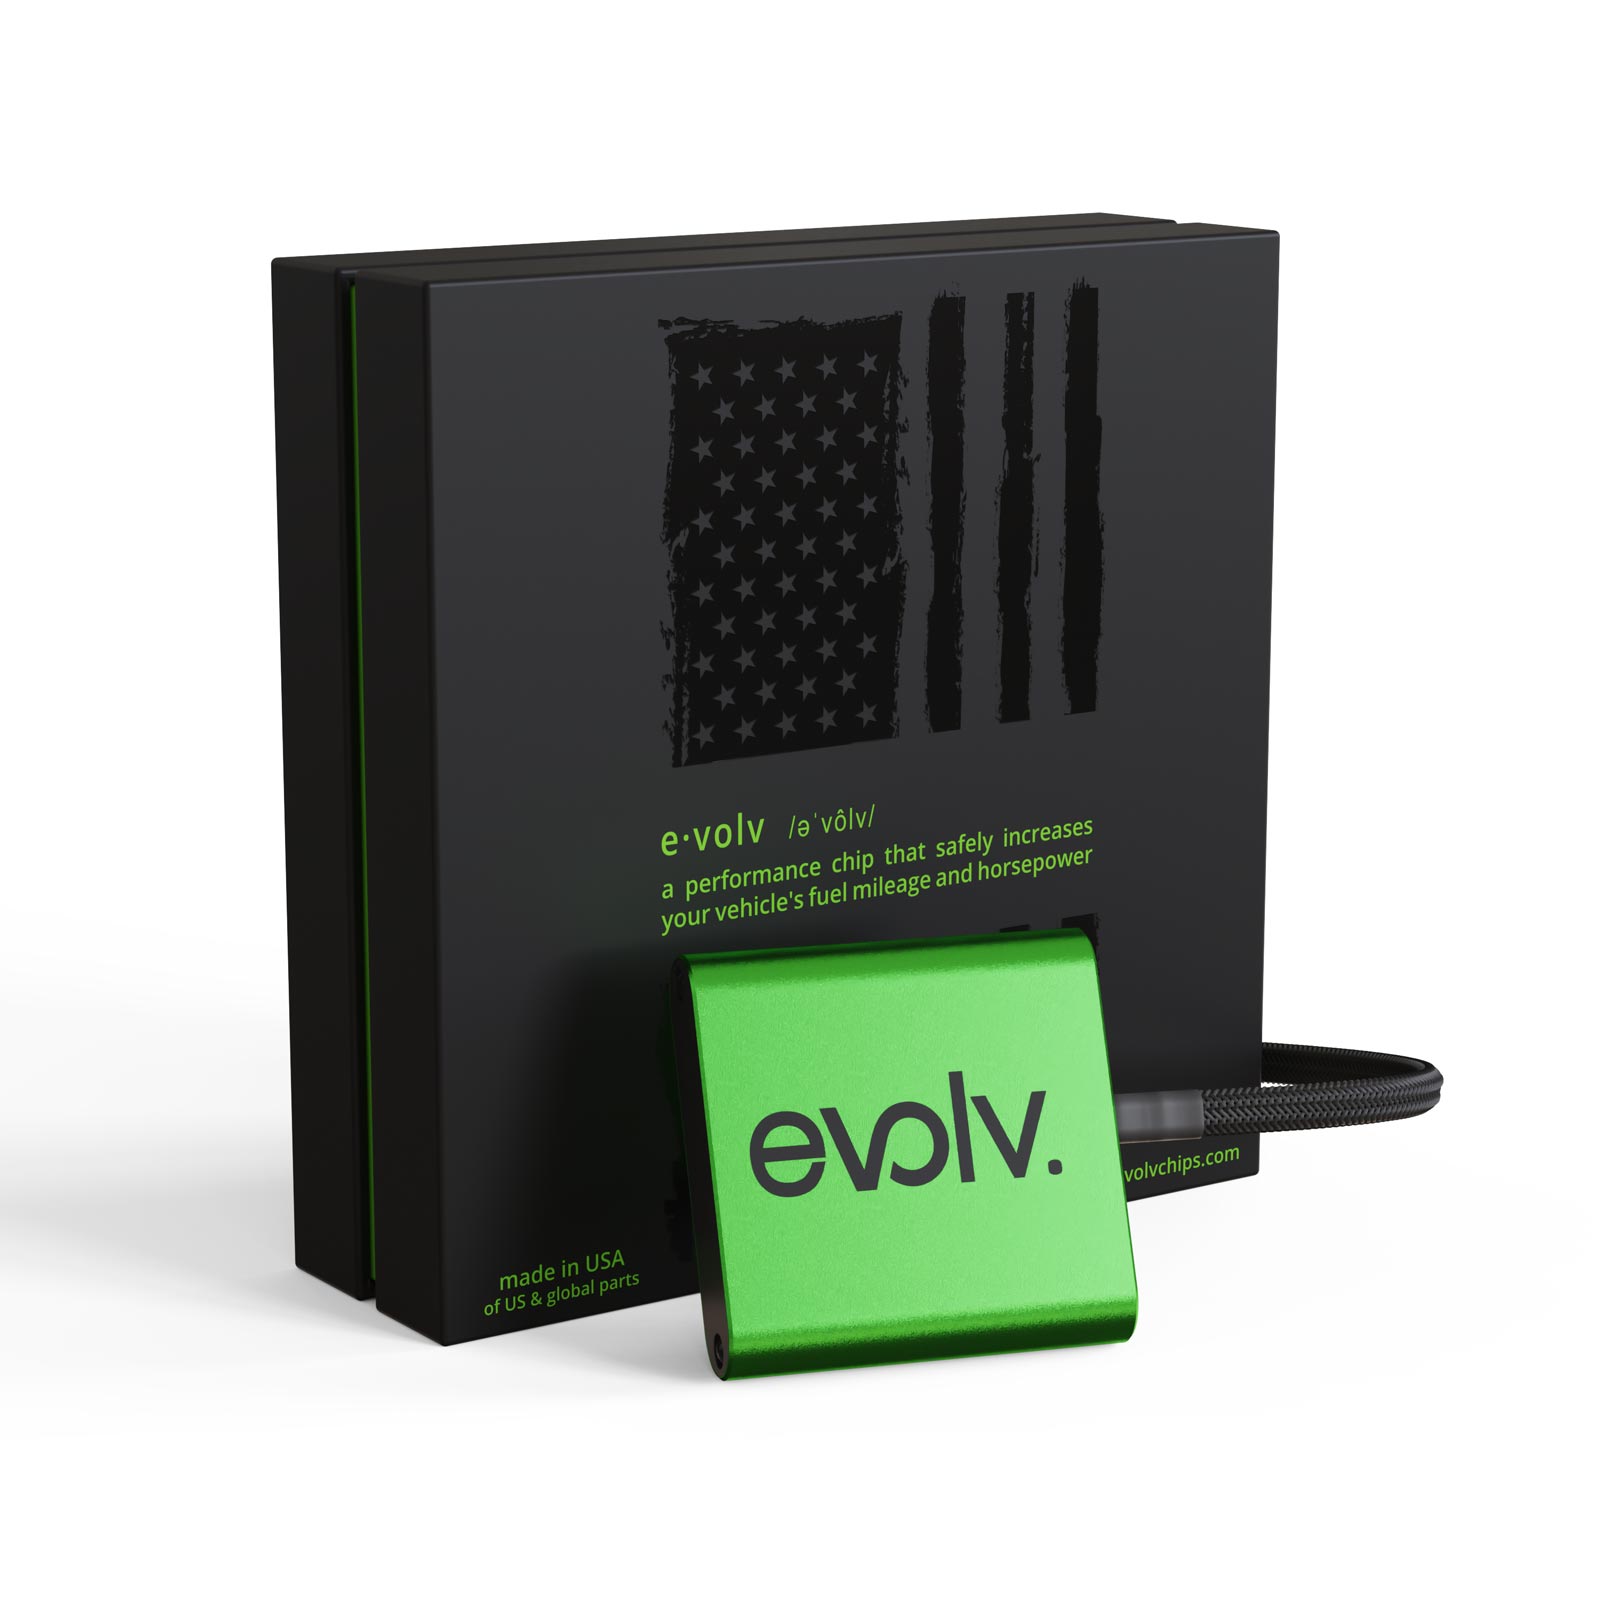 Increase your fuel mileage, performance and throttle response with an Evolv Genesis GV70 Performance Chip!